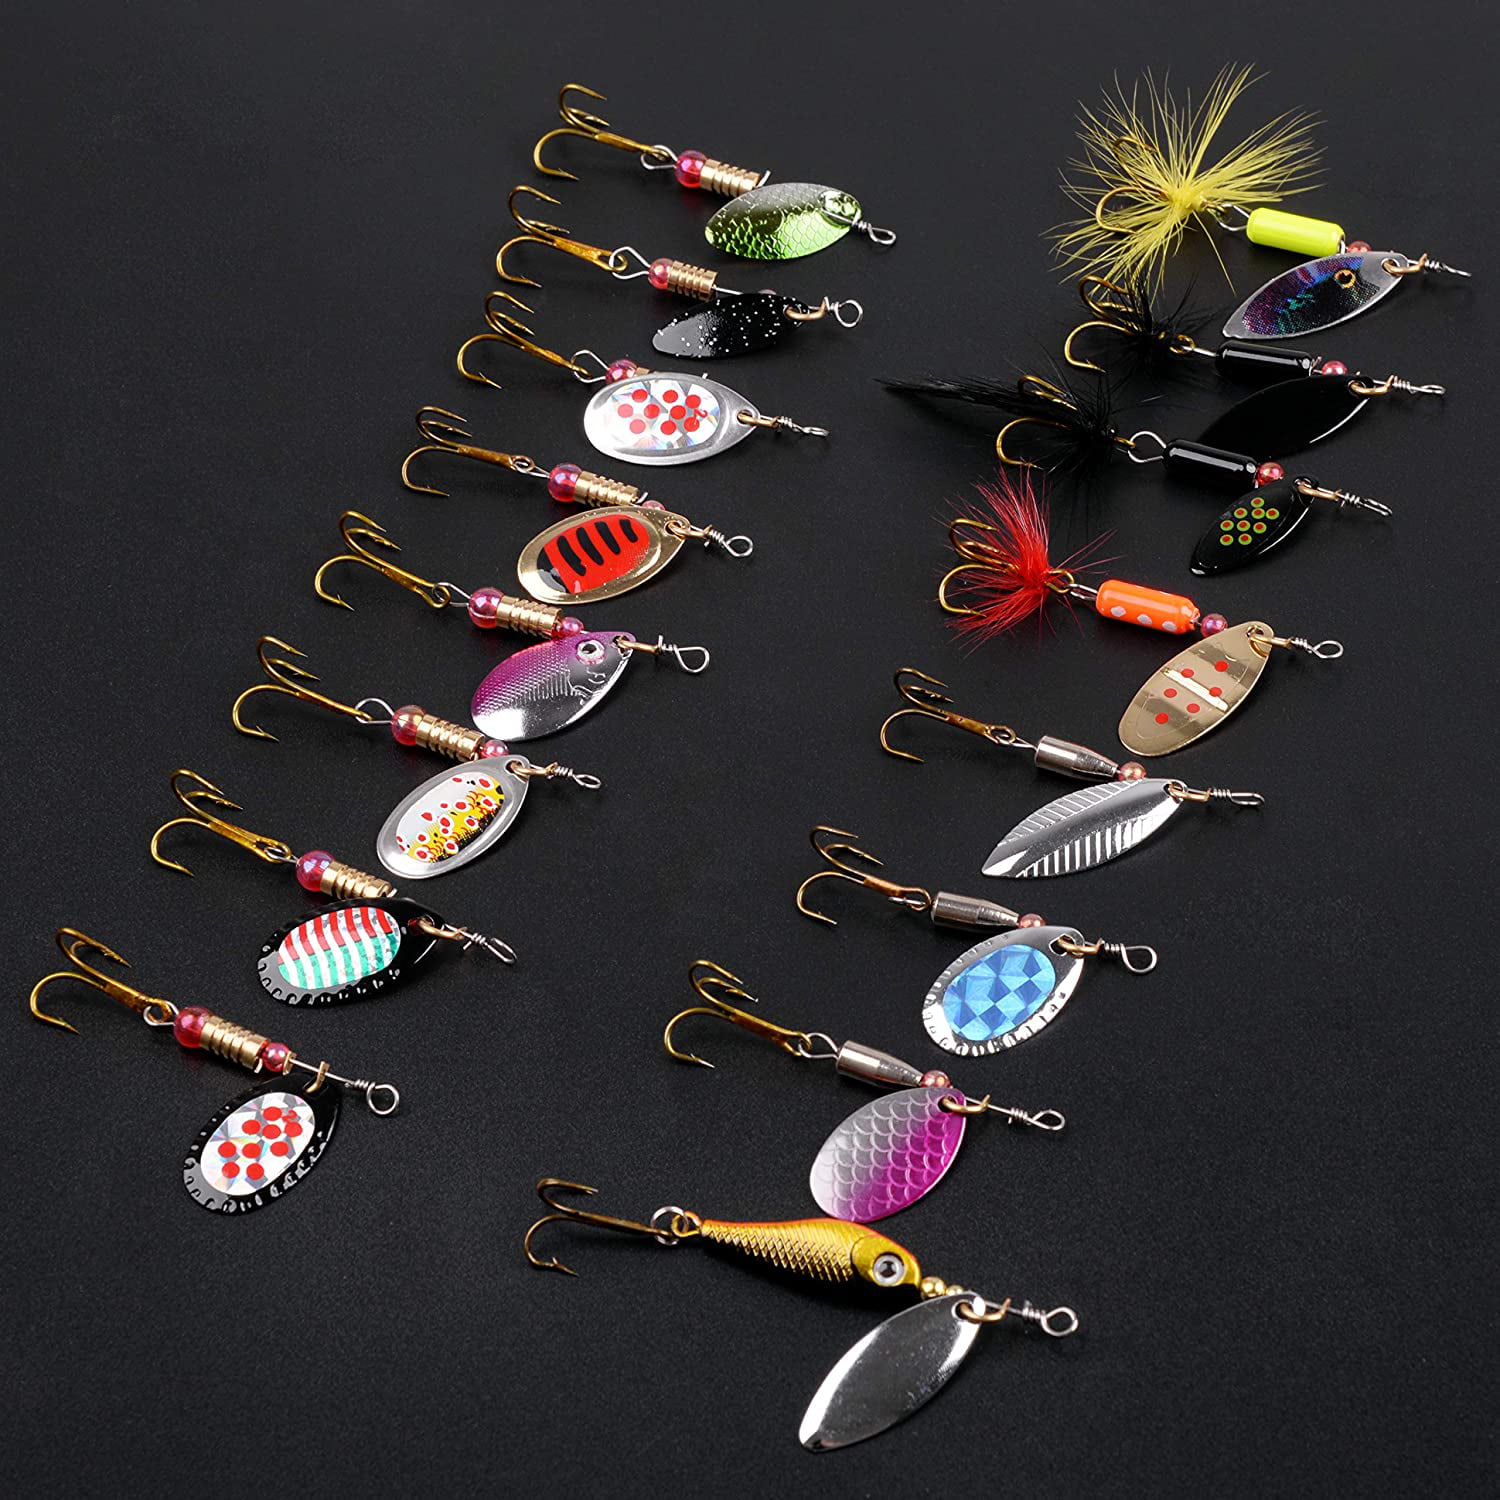 Fishing Lure Kit for Trout 16pcs Spinner Baits Feather Tail Spinner